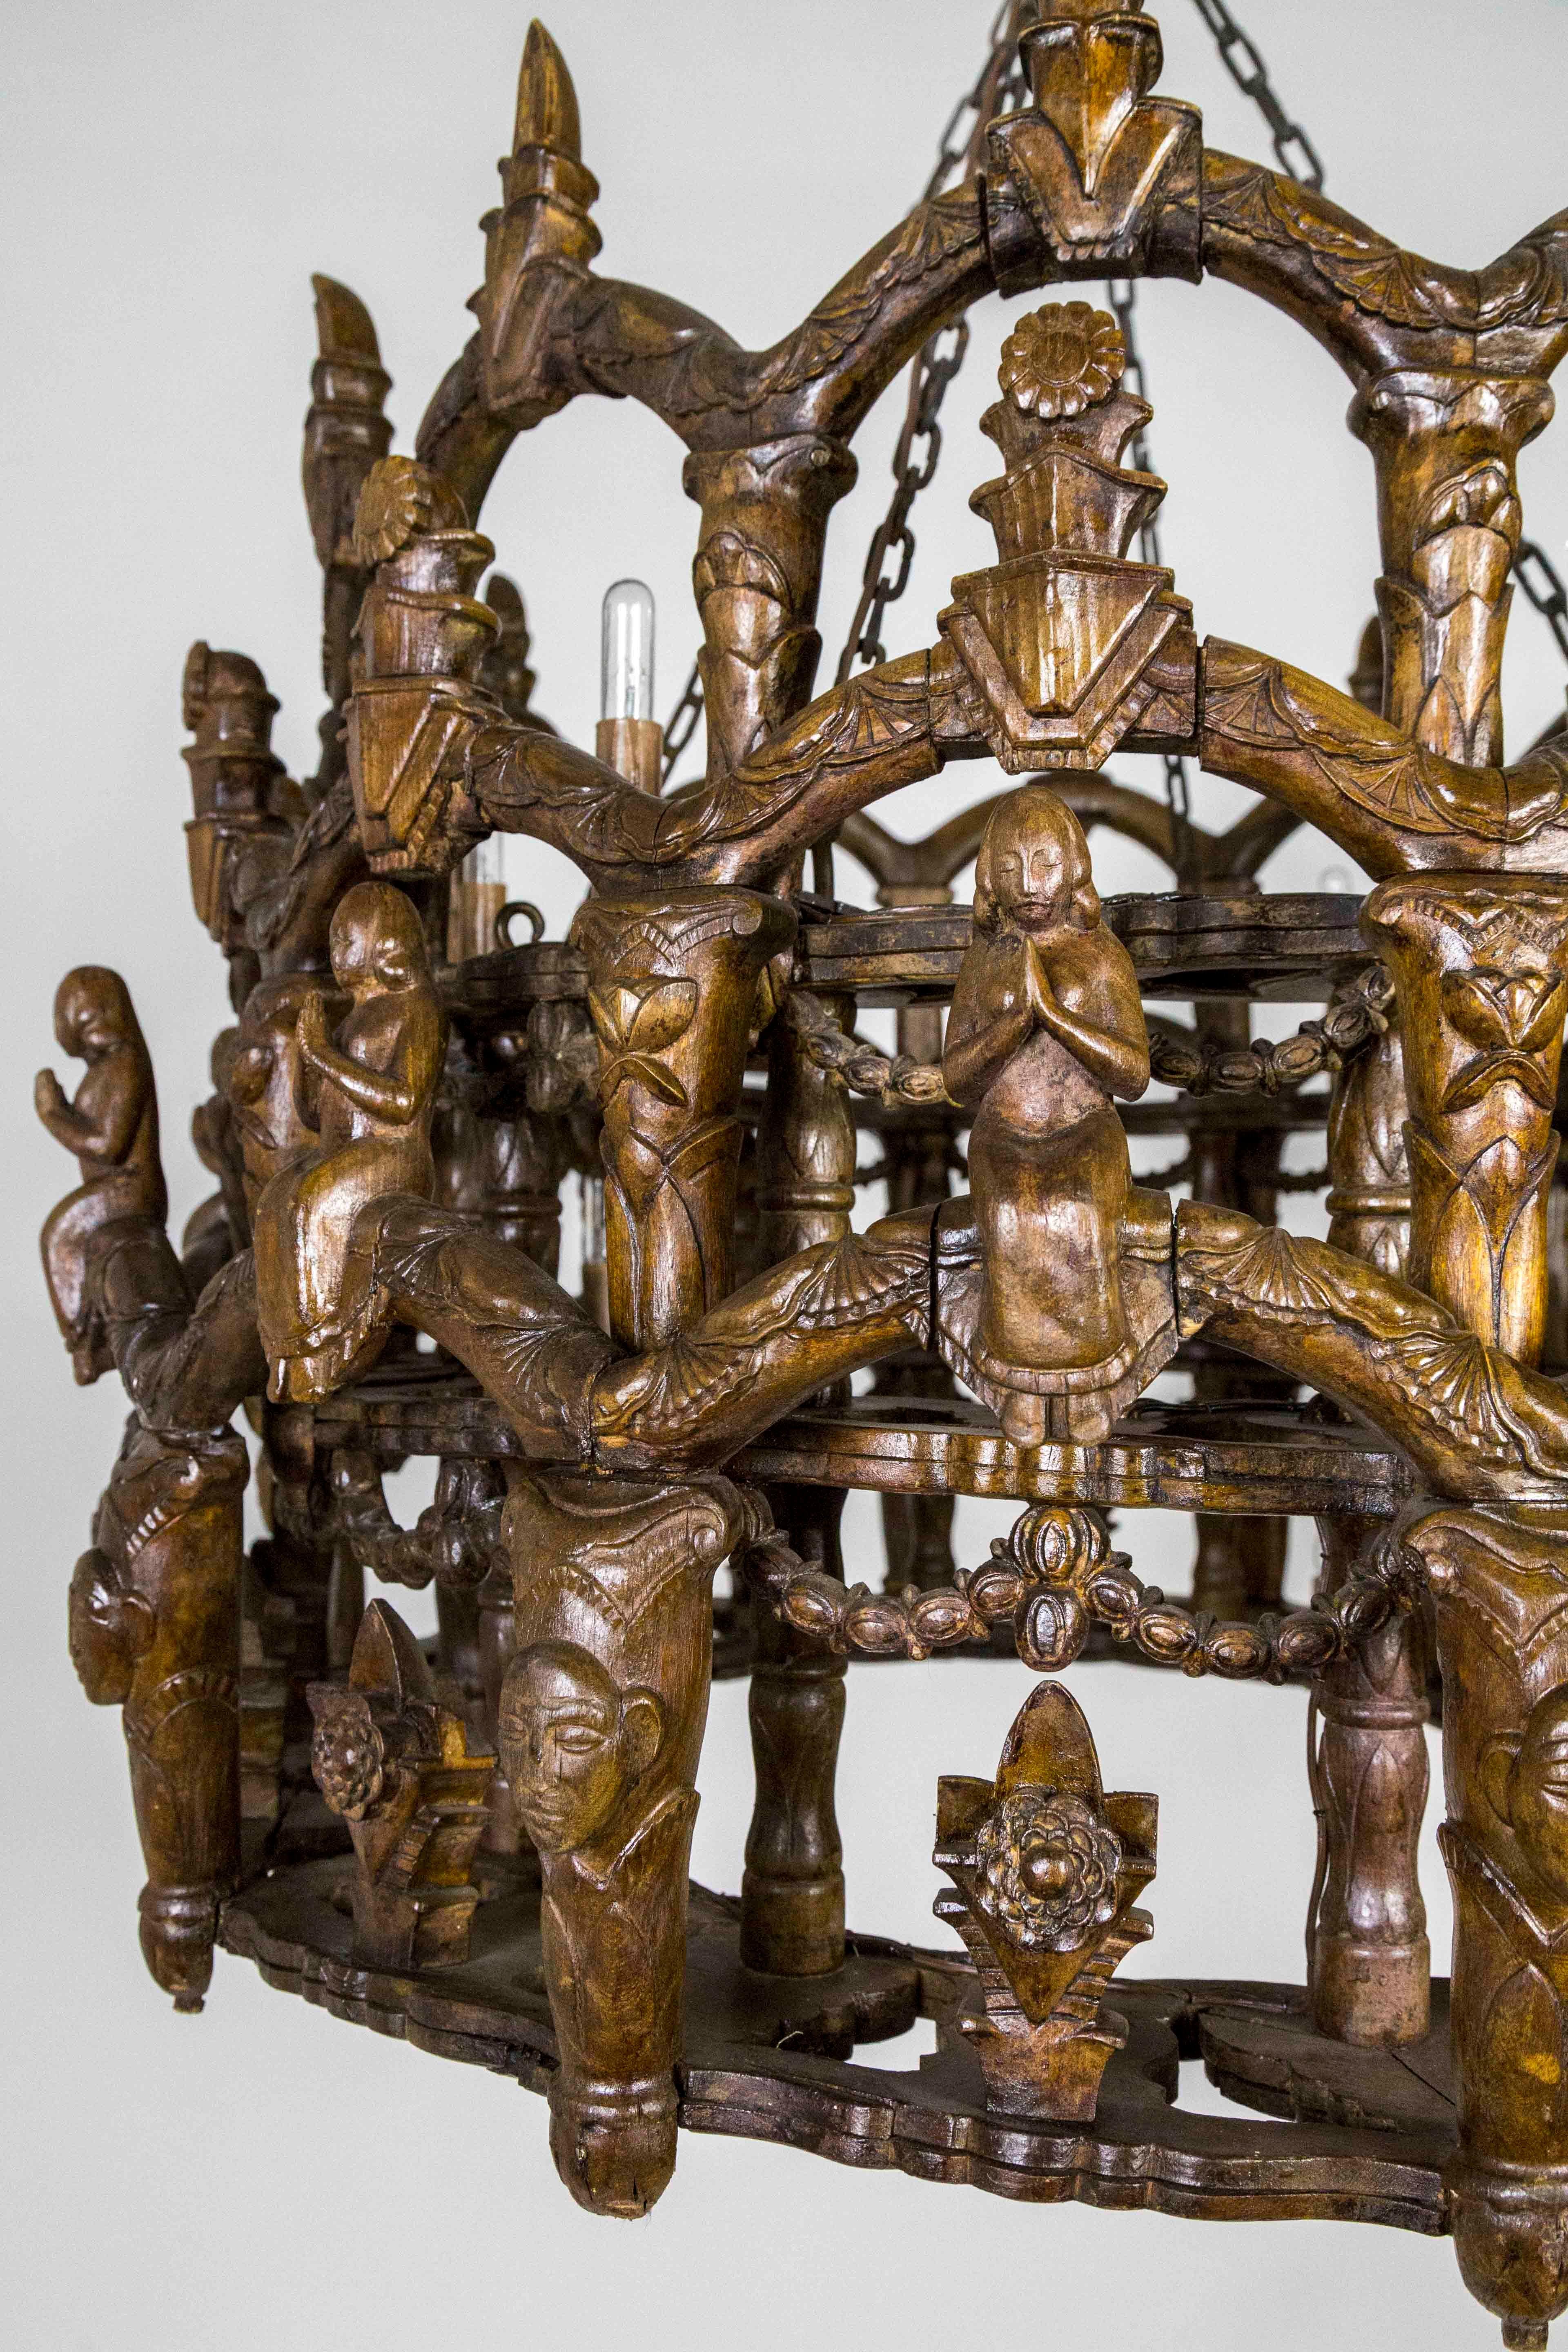 Hand-Carved Carved Wooden S. American Folk Chandelier with Figures and Arches